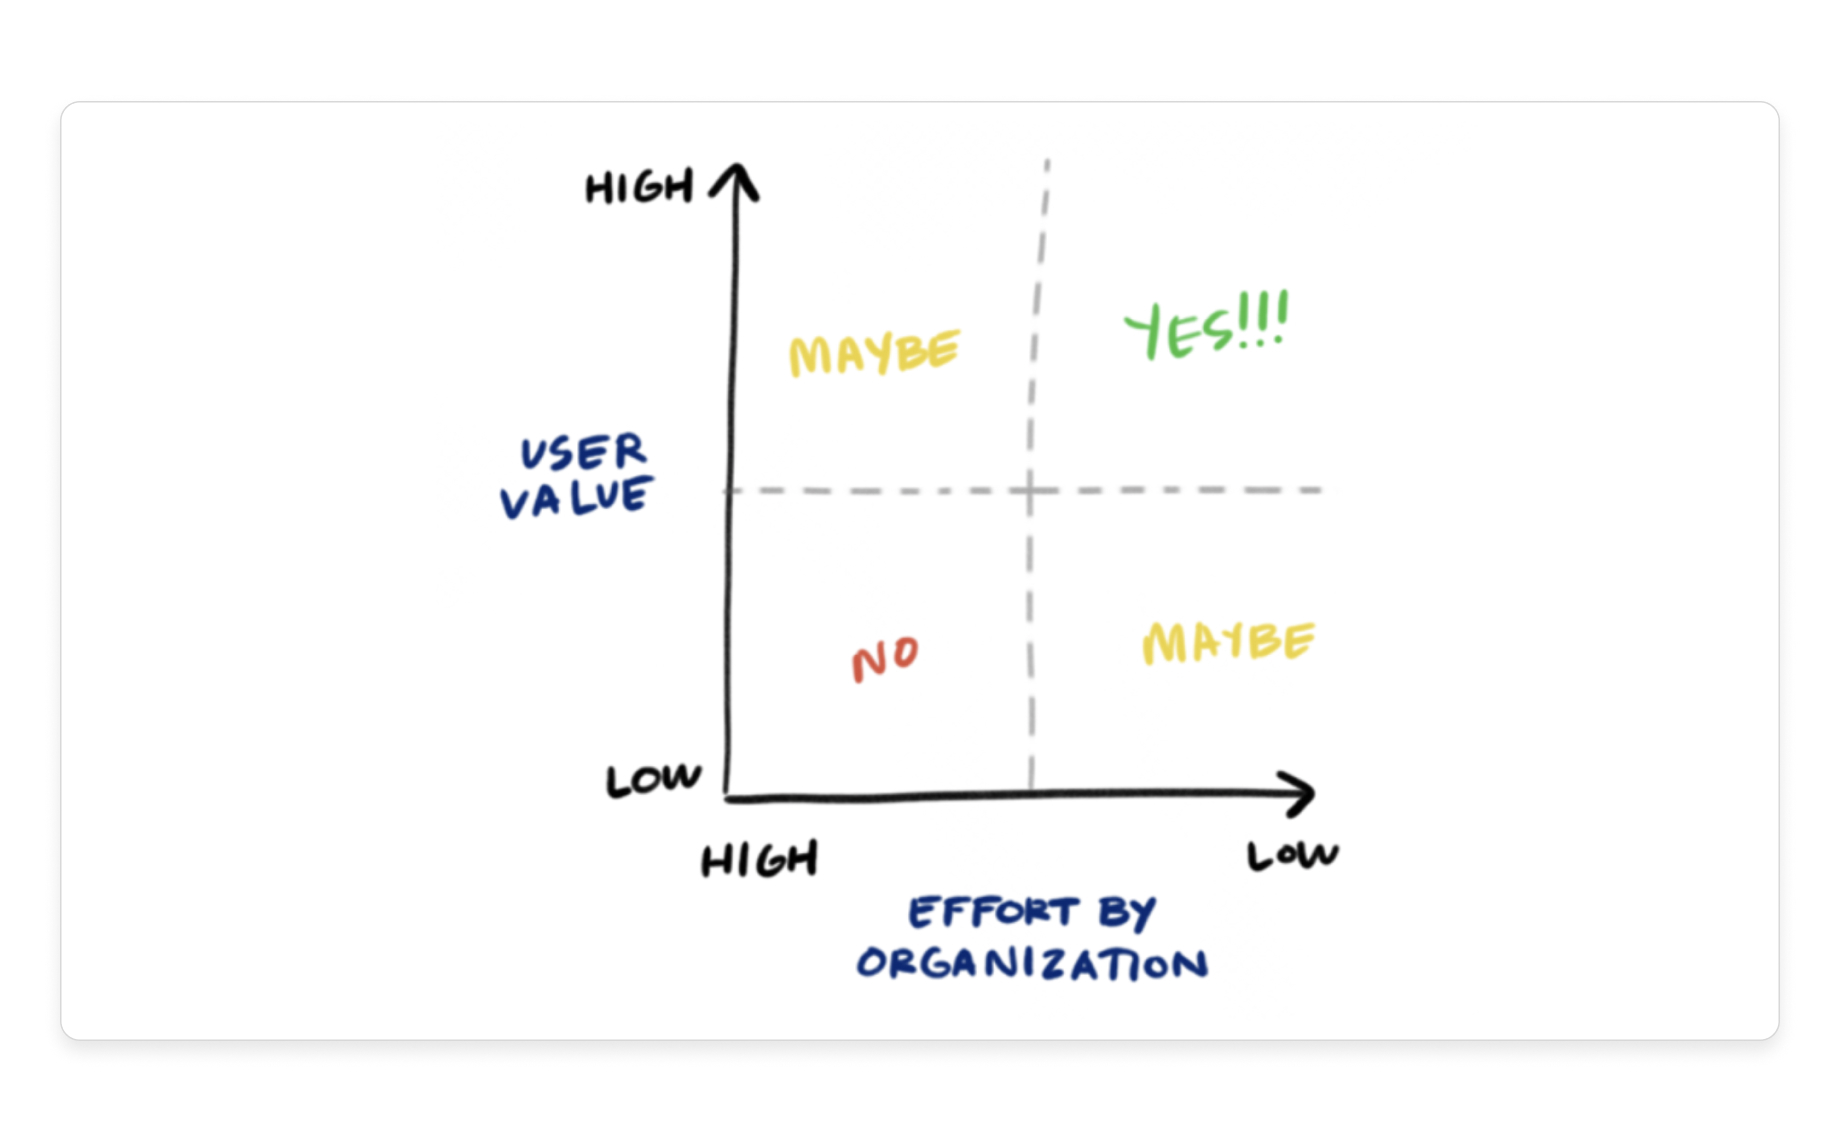 Prioritization matrix showing the effort & users’ value